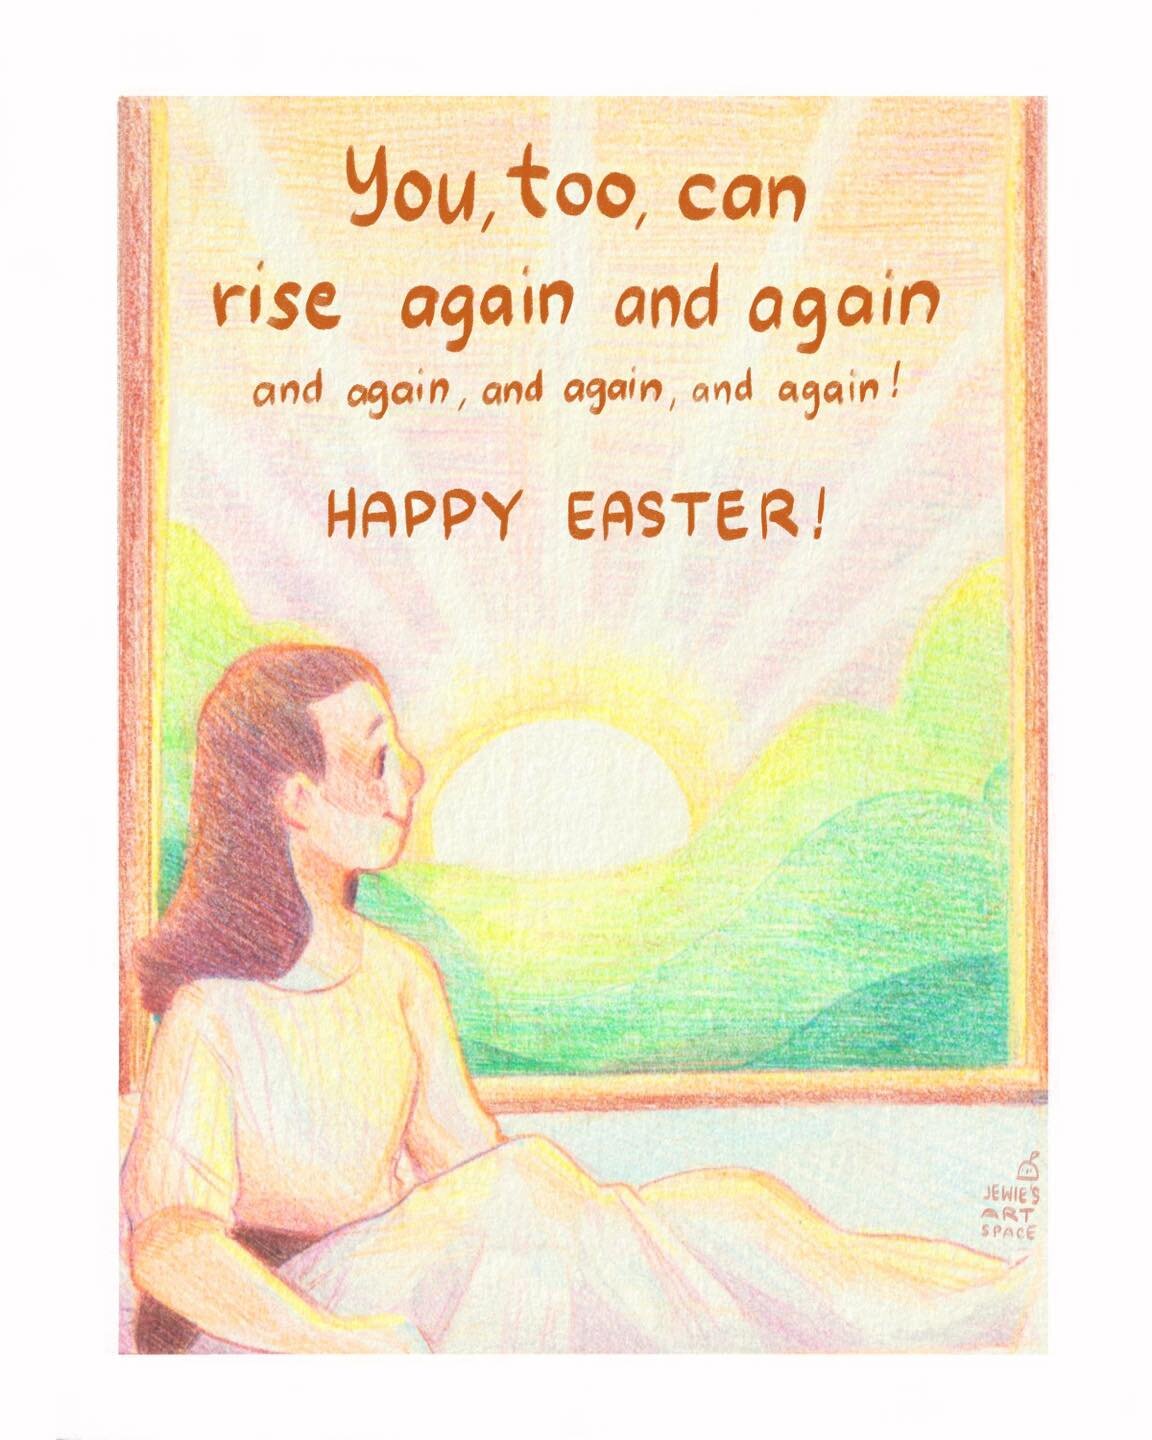 A blessed and joyful Easter to everybody! 🤗💛

At the start of Lent, my brain was in &ldquo;over familiarity&rdquo; mode. 

But as we entered Holy Week, that over familiarity turned into a loving embrace of sureness!

That we, too, can rise again be